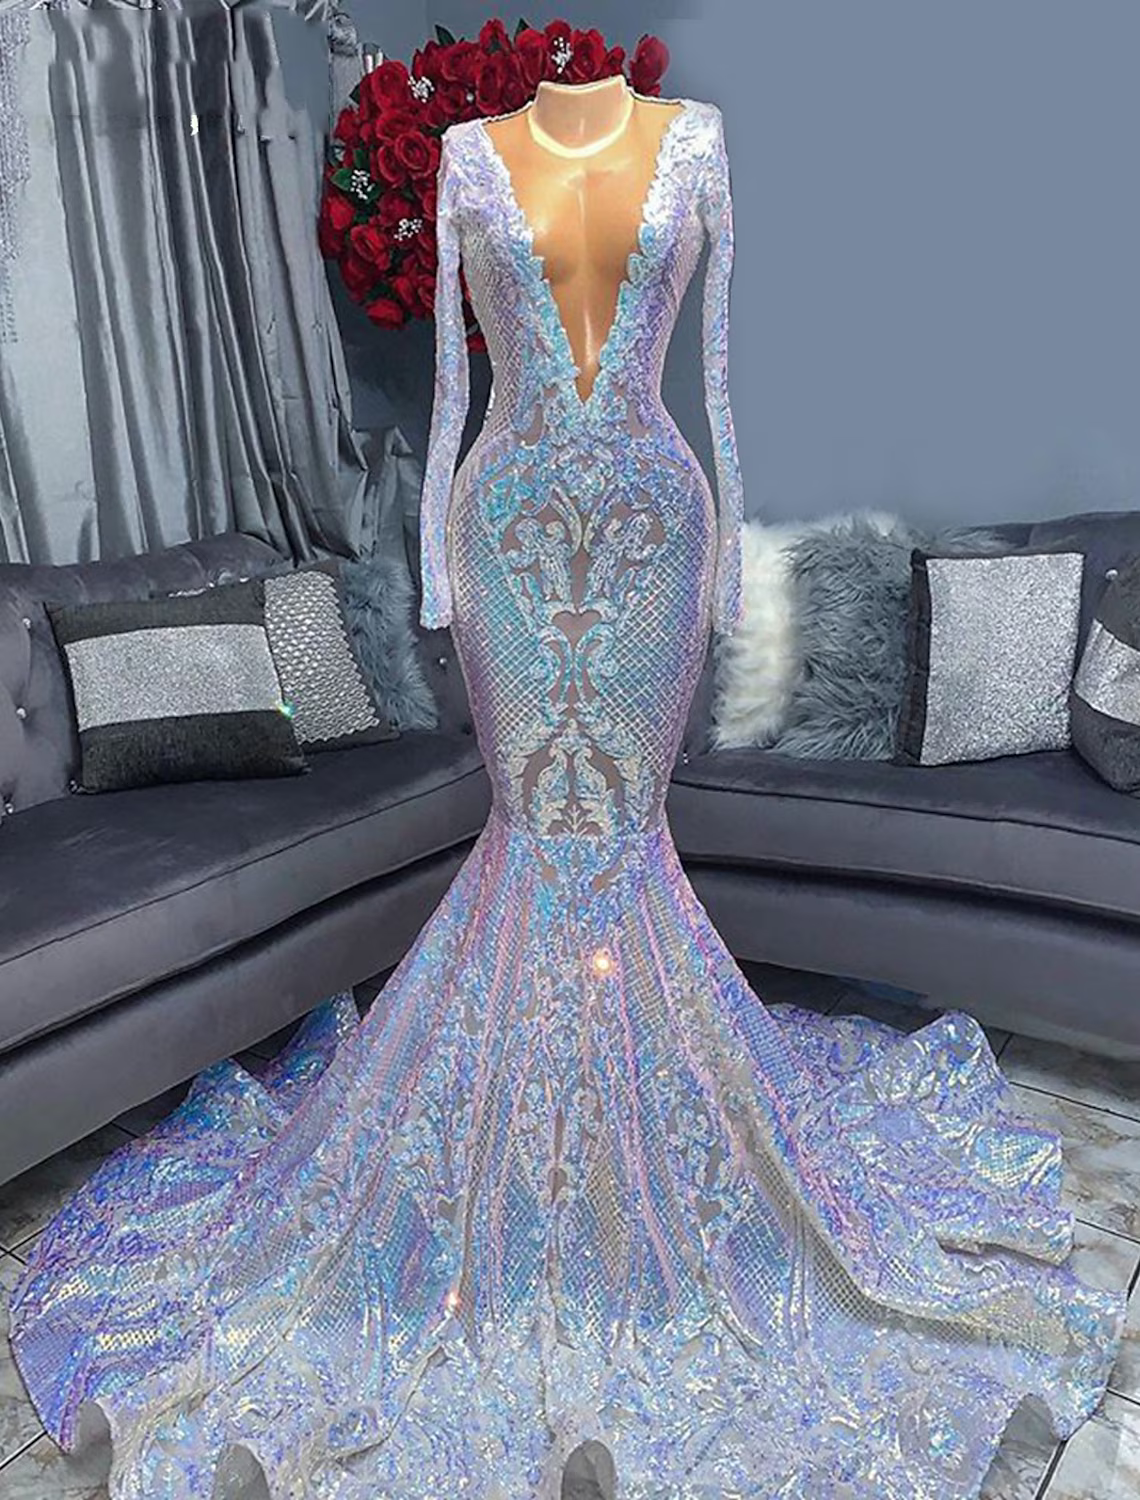 Evening Gown Floral Dress Formal Chapel Train Long Sleeve V Neck Sequined with